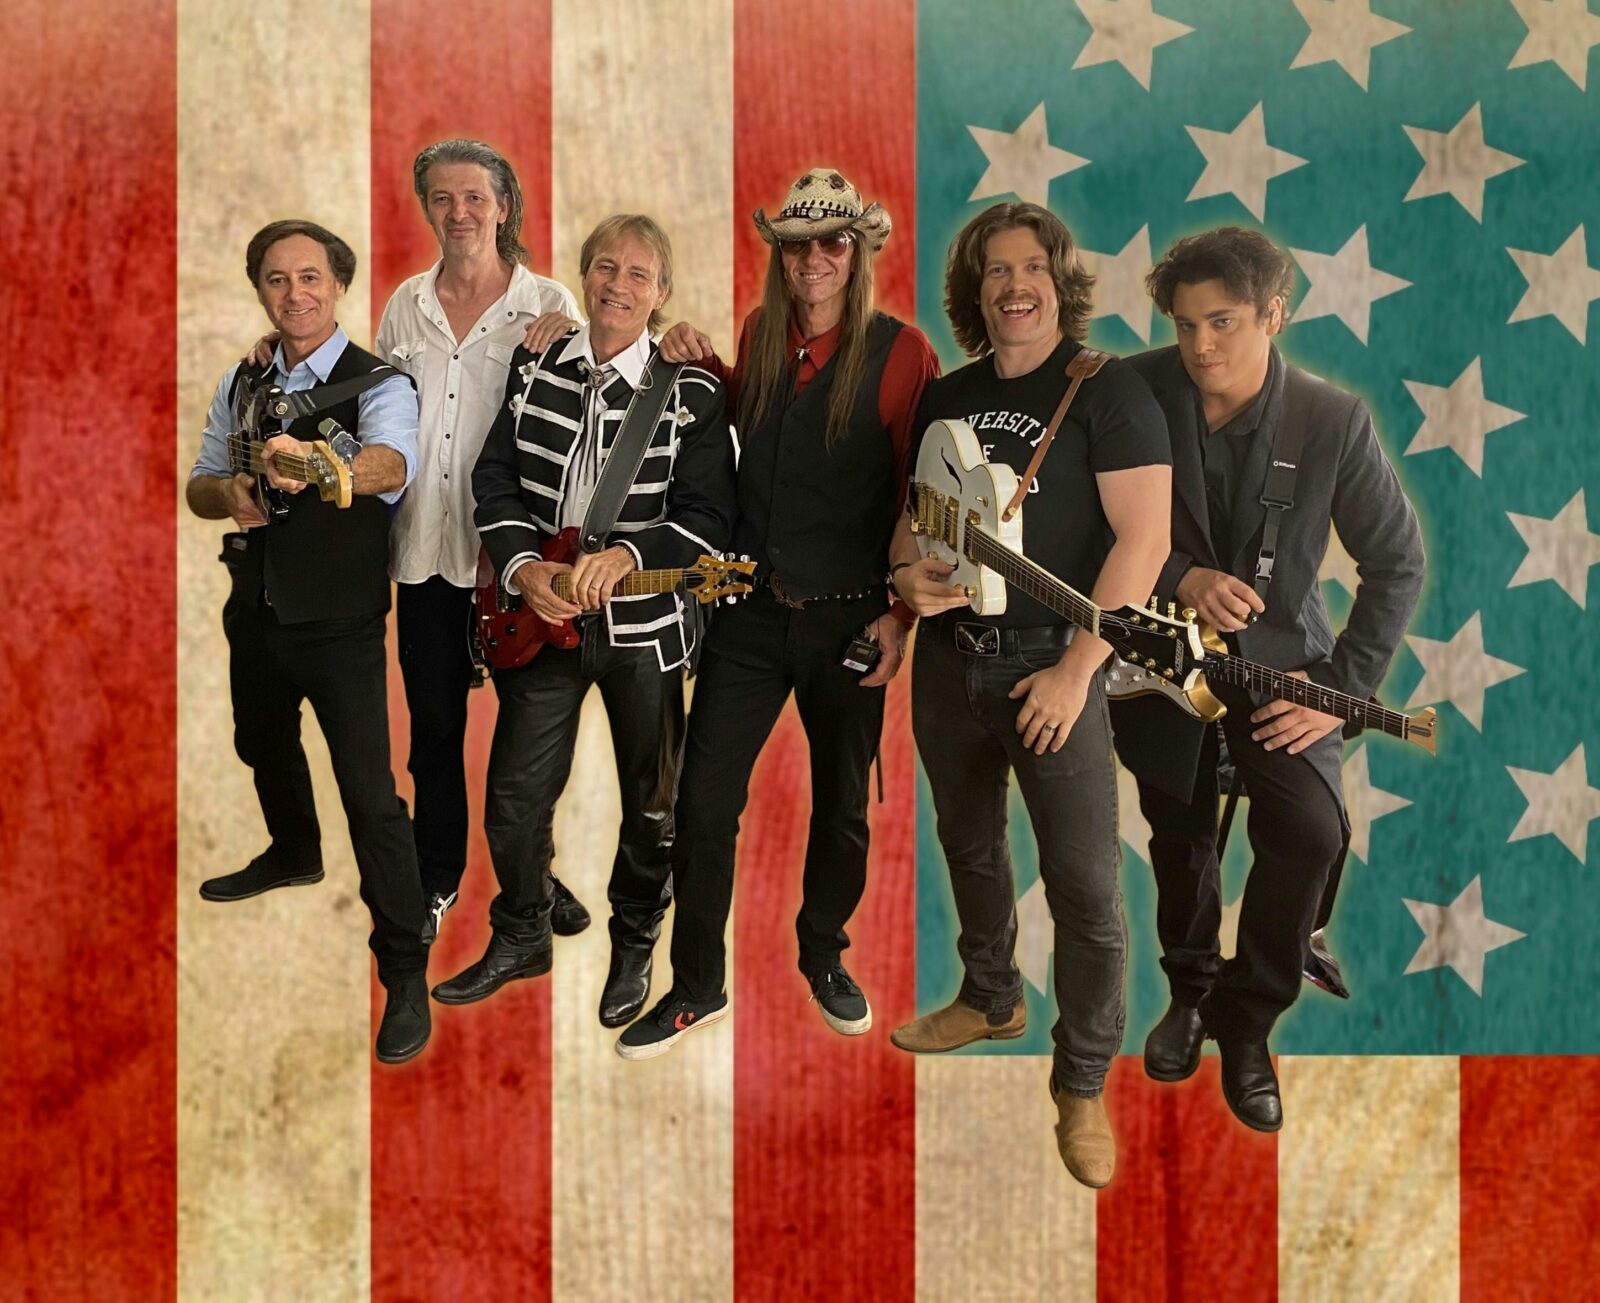 A group of country performers stand in front of the American flag